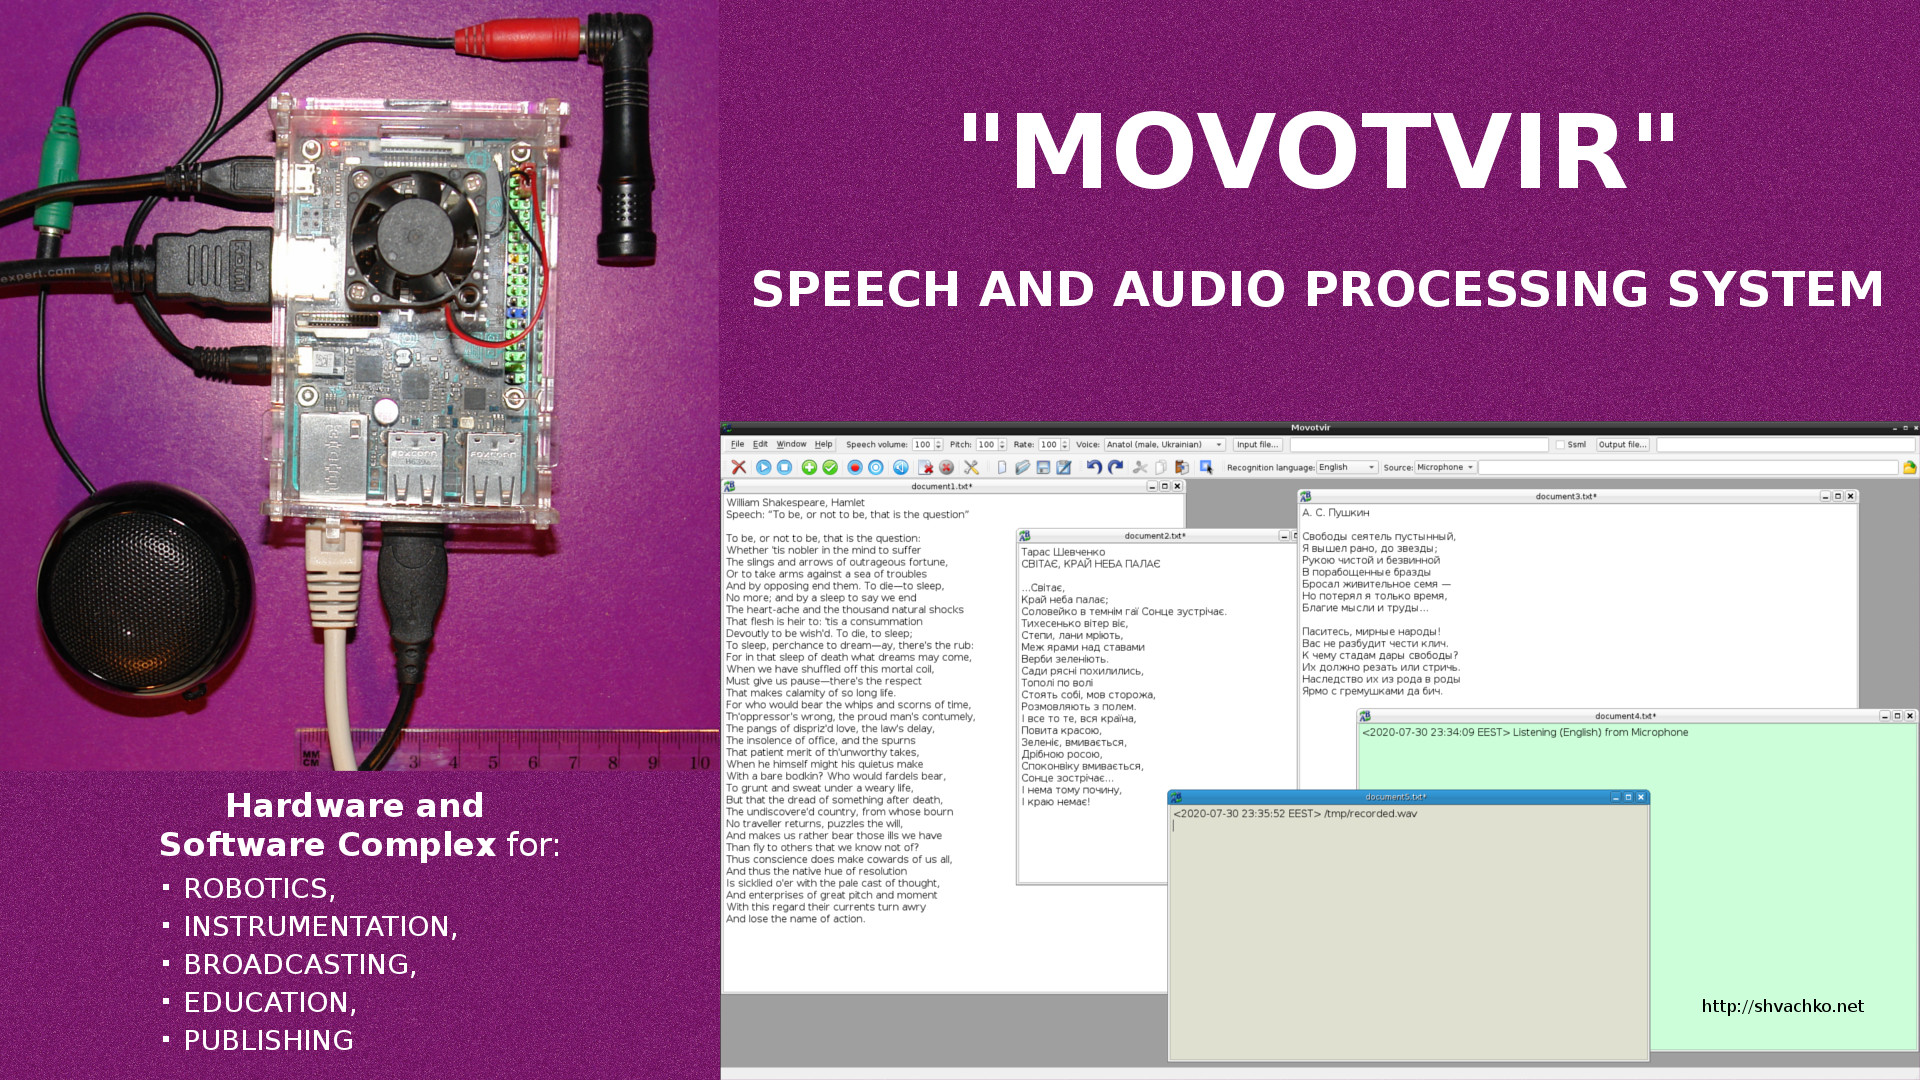 Speech and audio processing system _Movotvir_